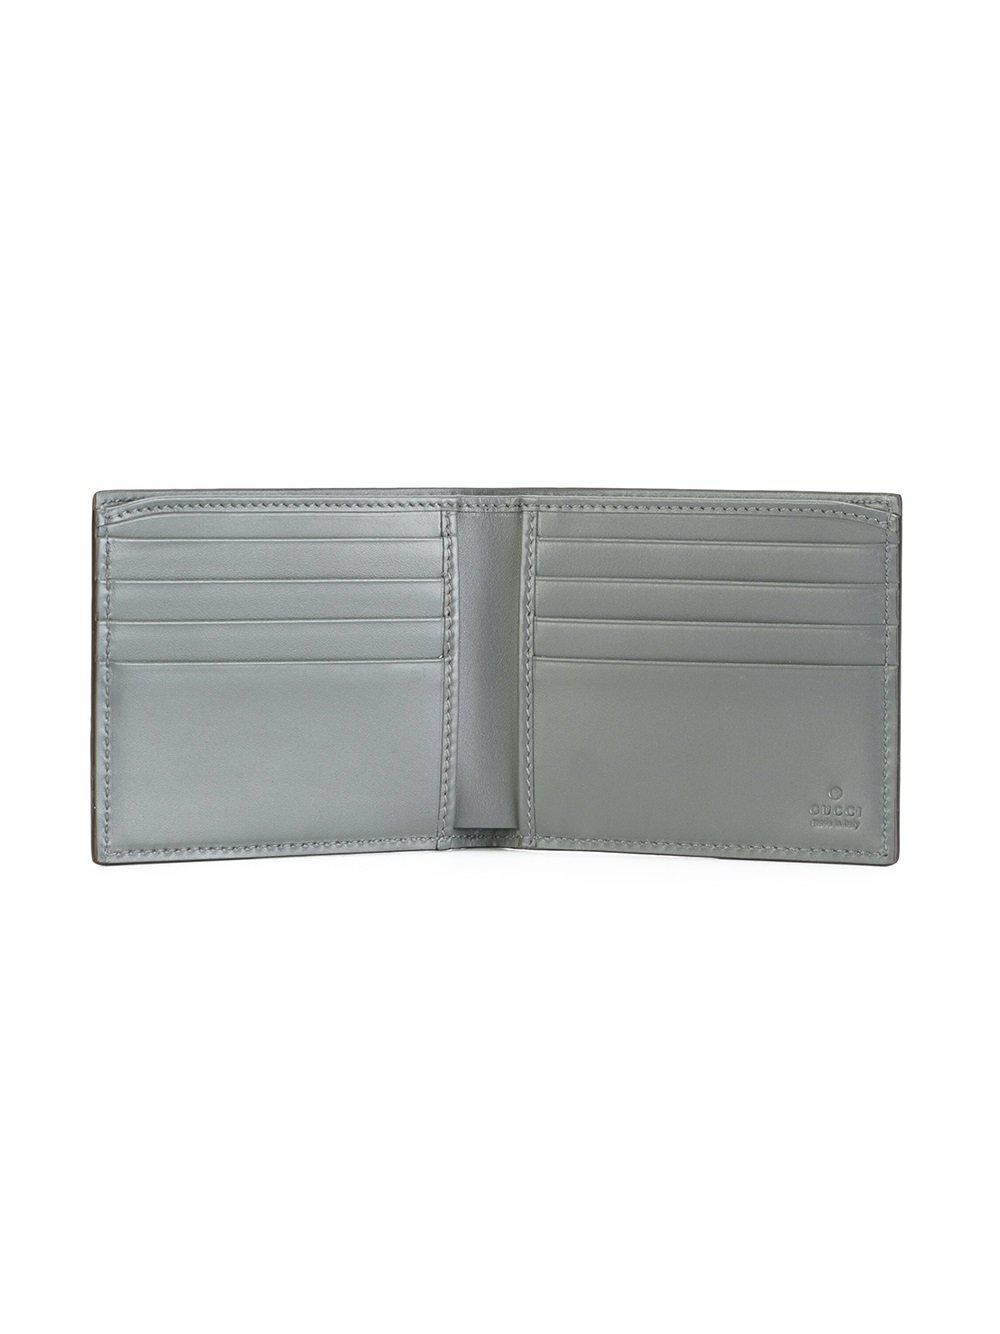 Lyst - Gucci Signature Wallet in Gray for Men